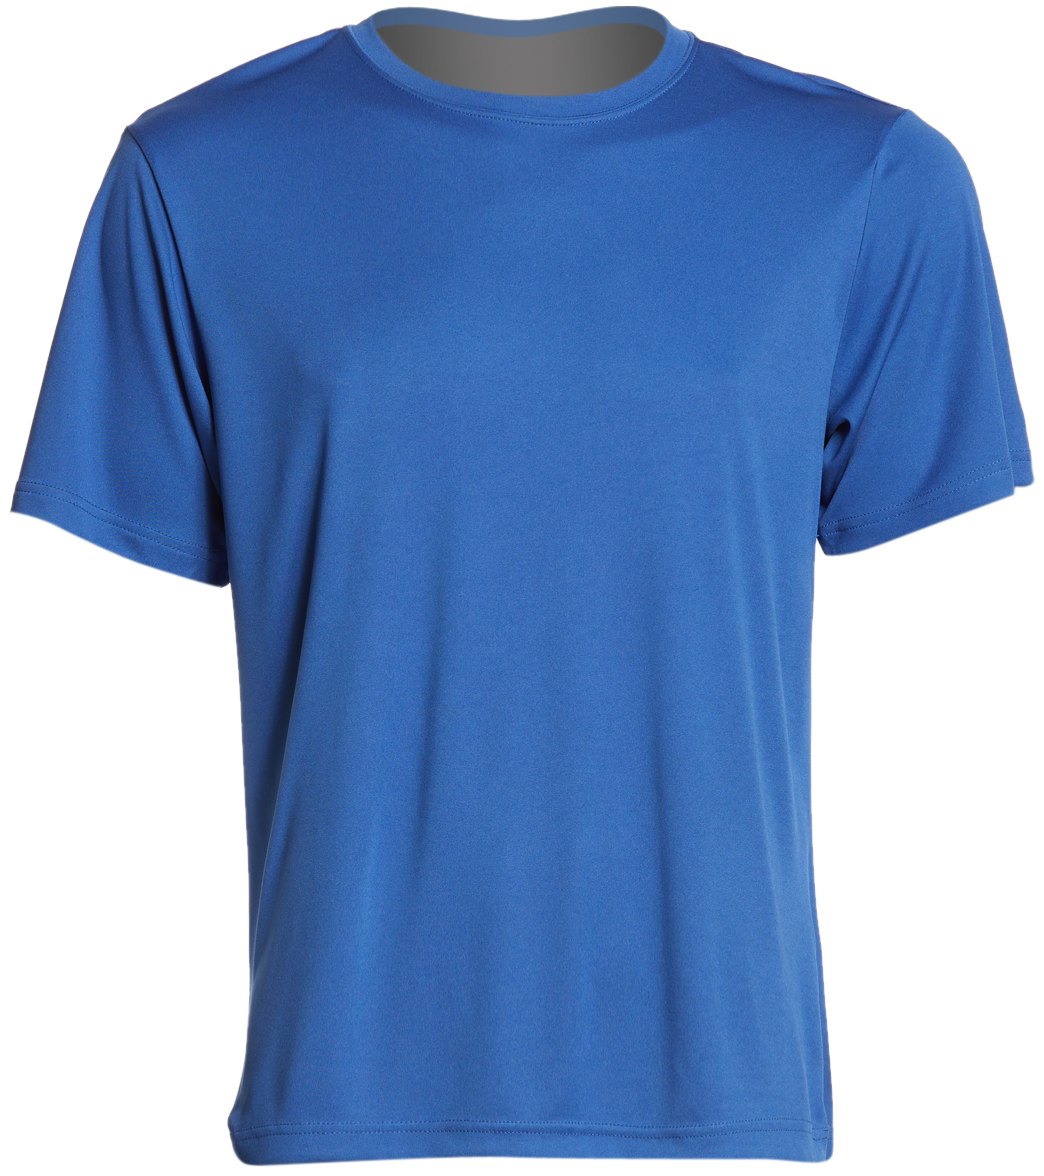 Men's Posicharge Competitortm Tee Shirt - True Royal X-Small Polyester - Swimoutlet.com